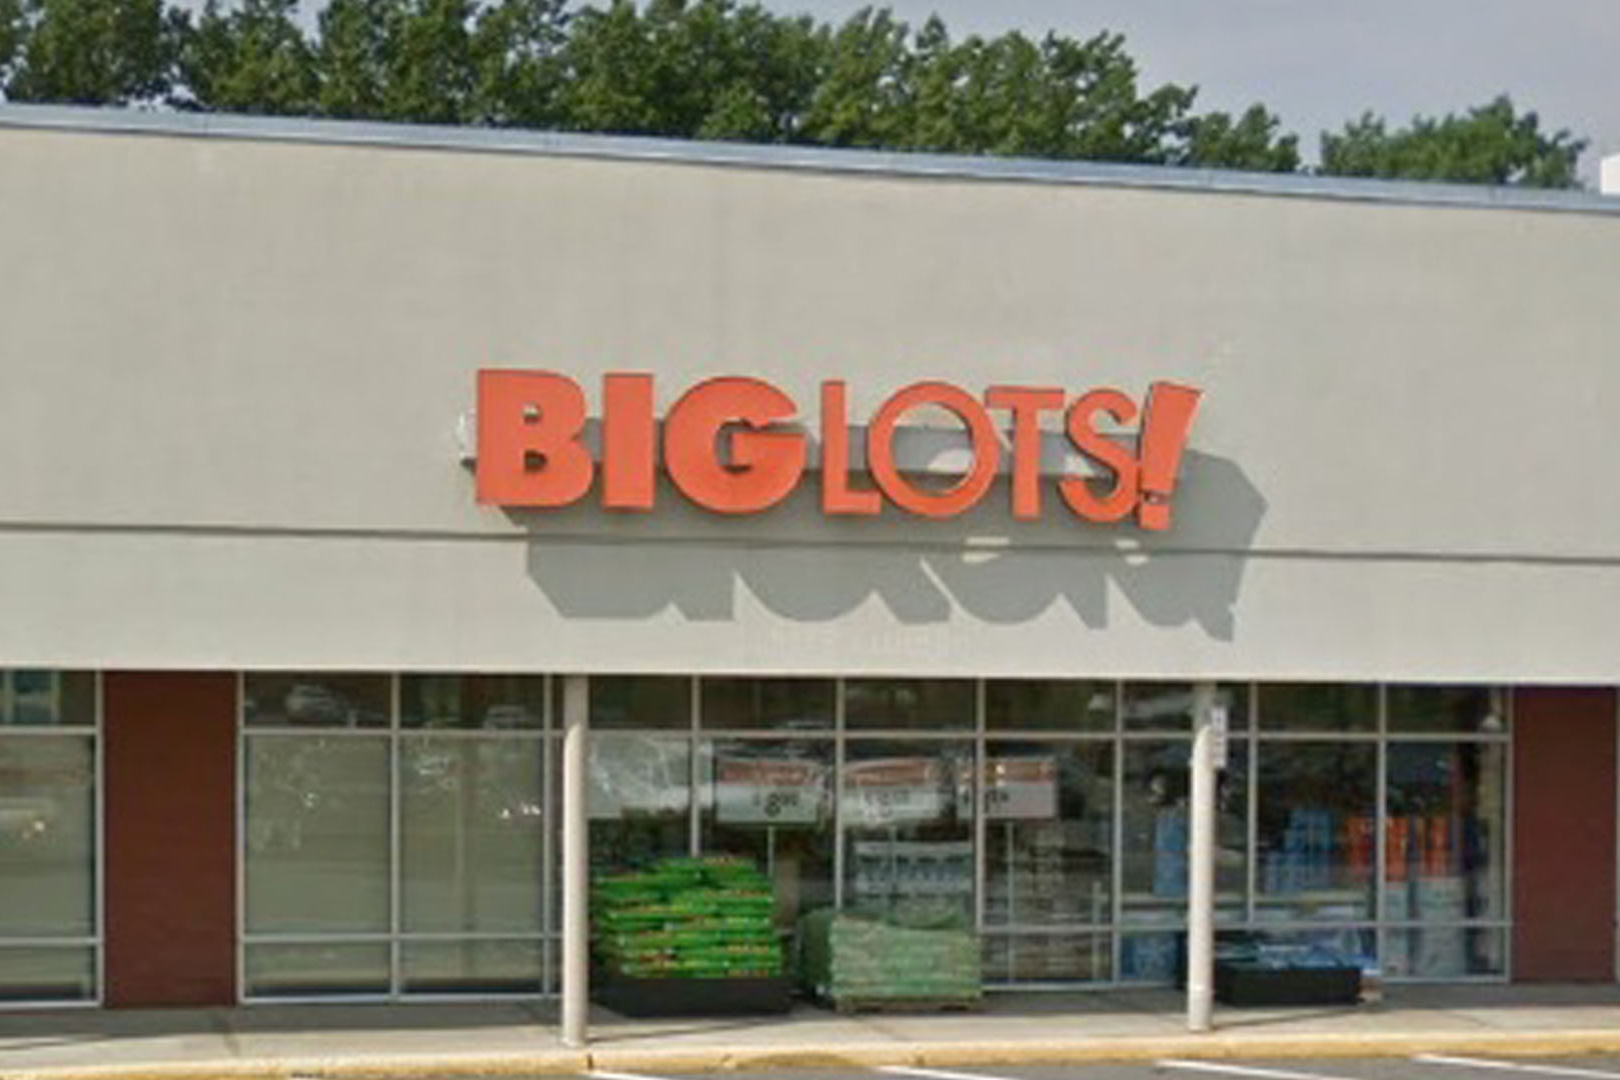 End of an Era: Two Big Lots Stores in Georgia Closing Soon